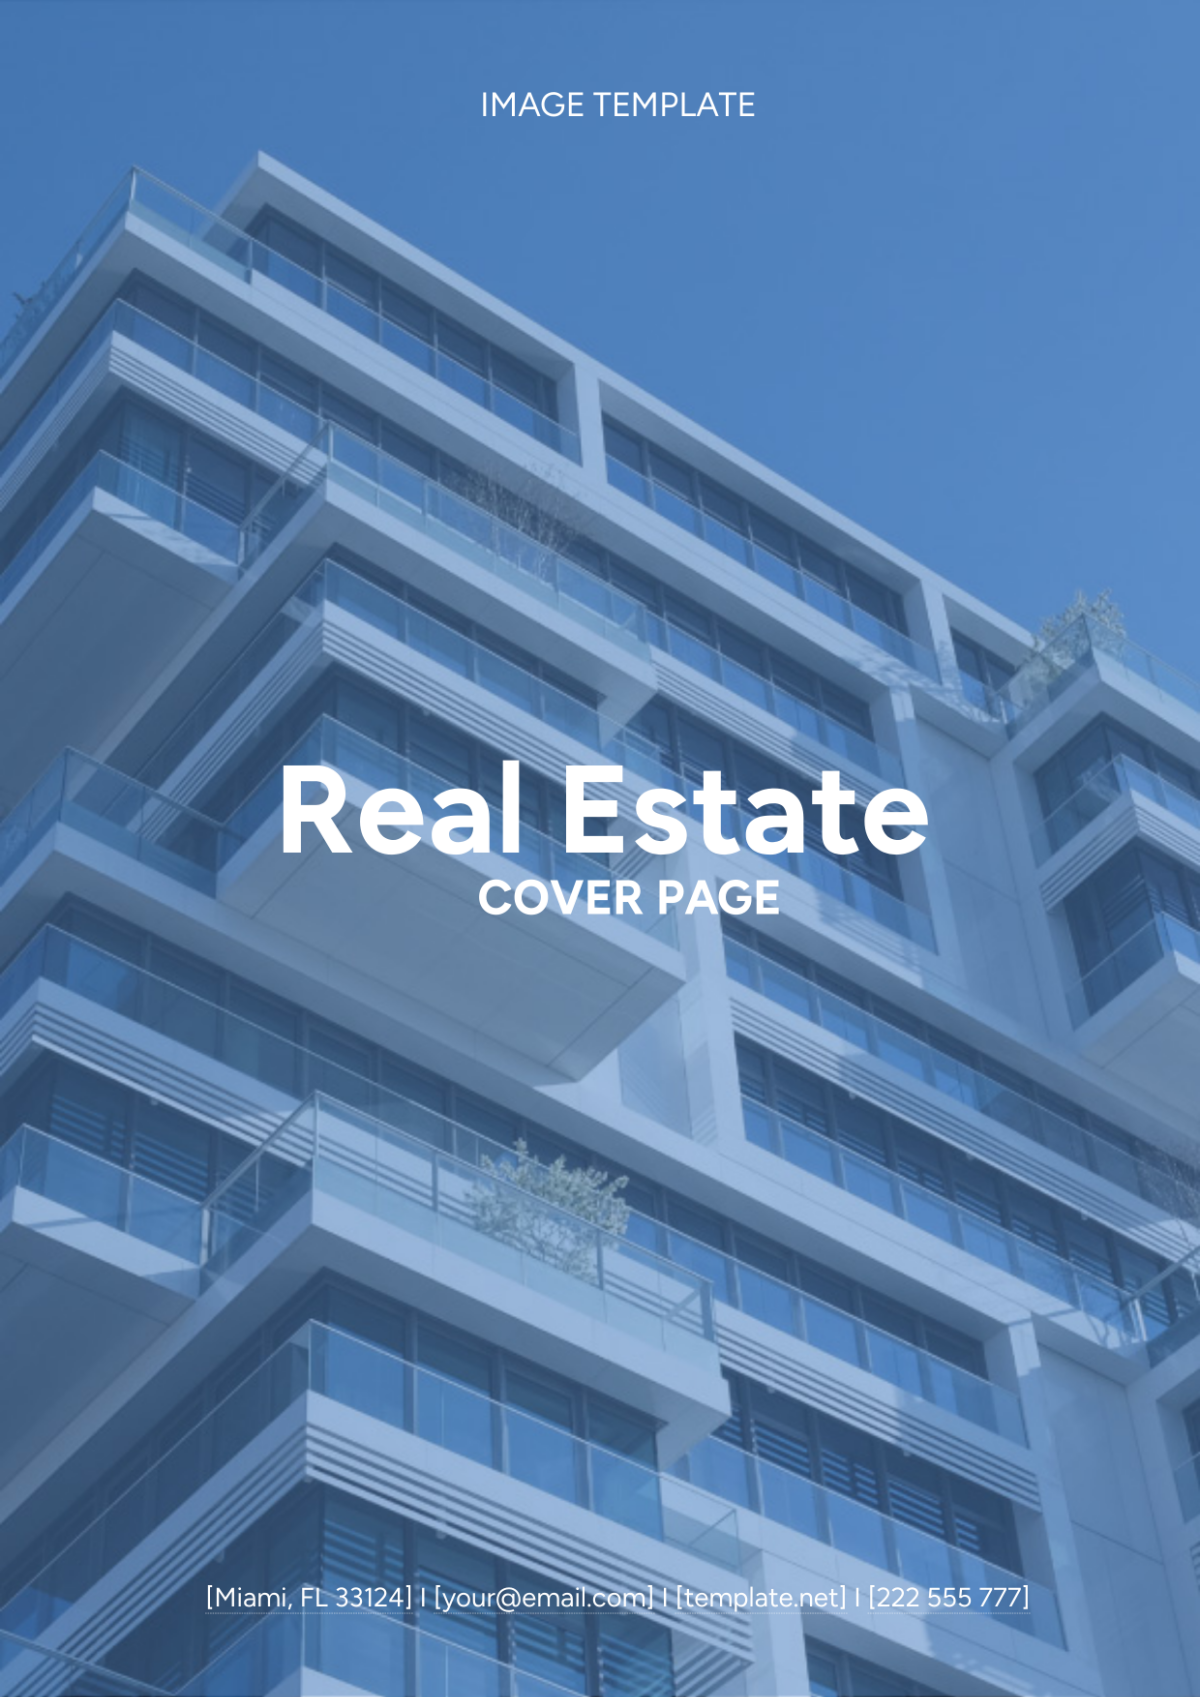 Free Real Estate Cover Page Image Template